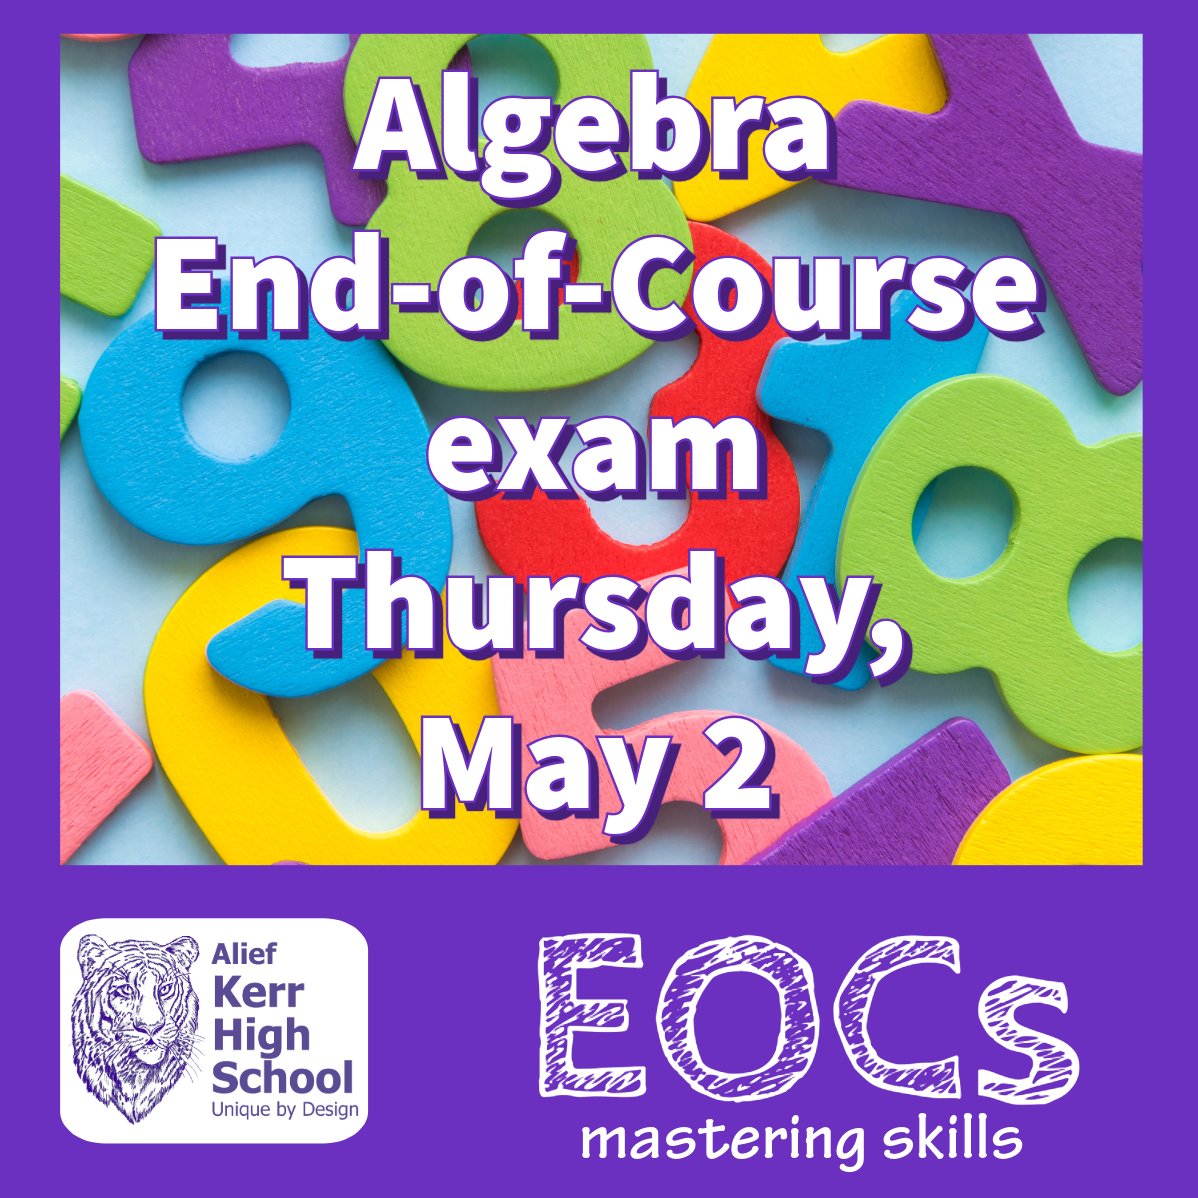 Algebra I students find the solution tomorrow, May 2, where X = their best performance on the EOC exam. #masterylevel